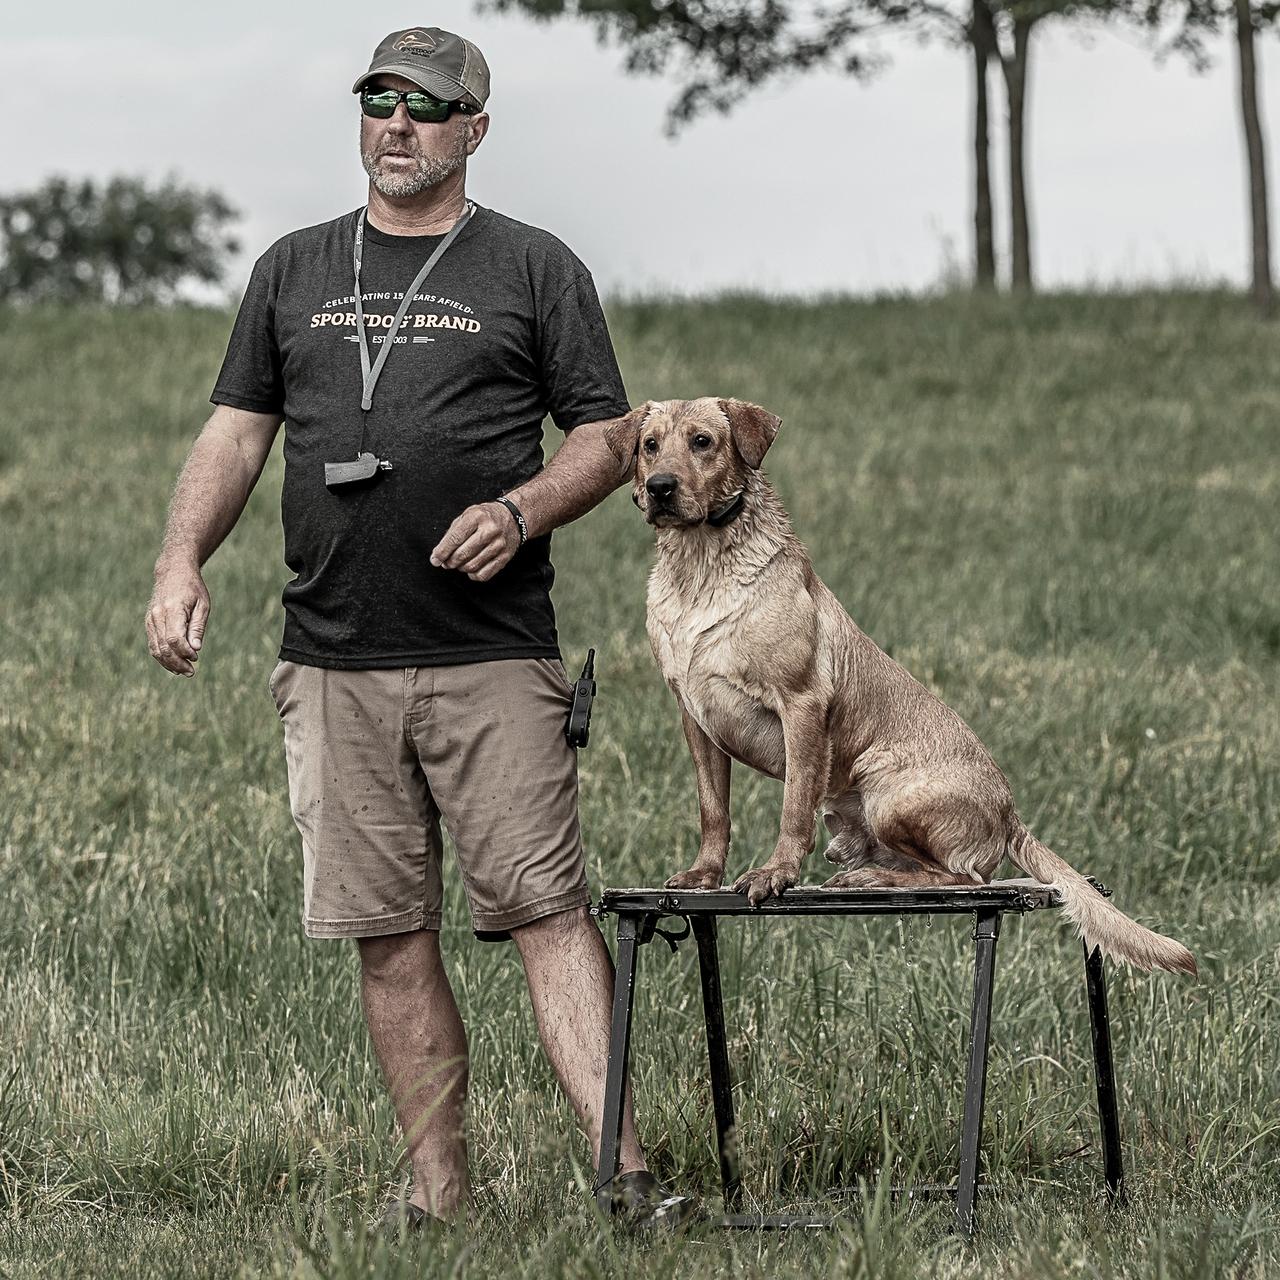 Man standing by yellow lab on dog stand. Both focused in on something far away.